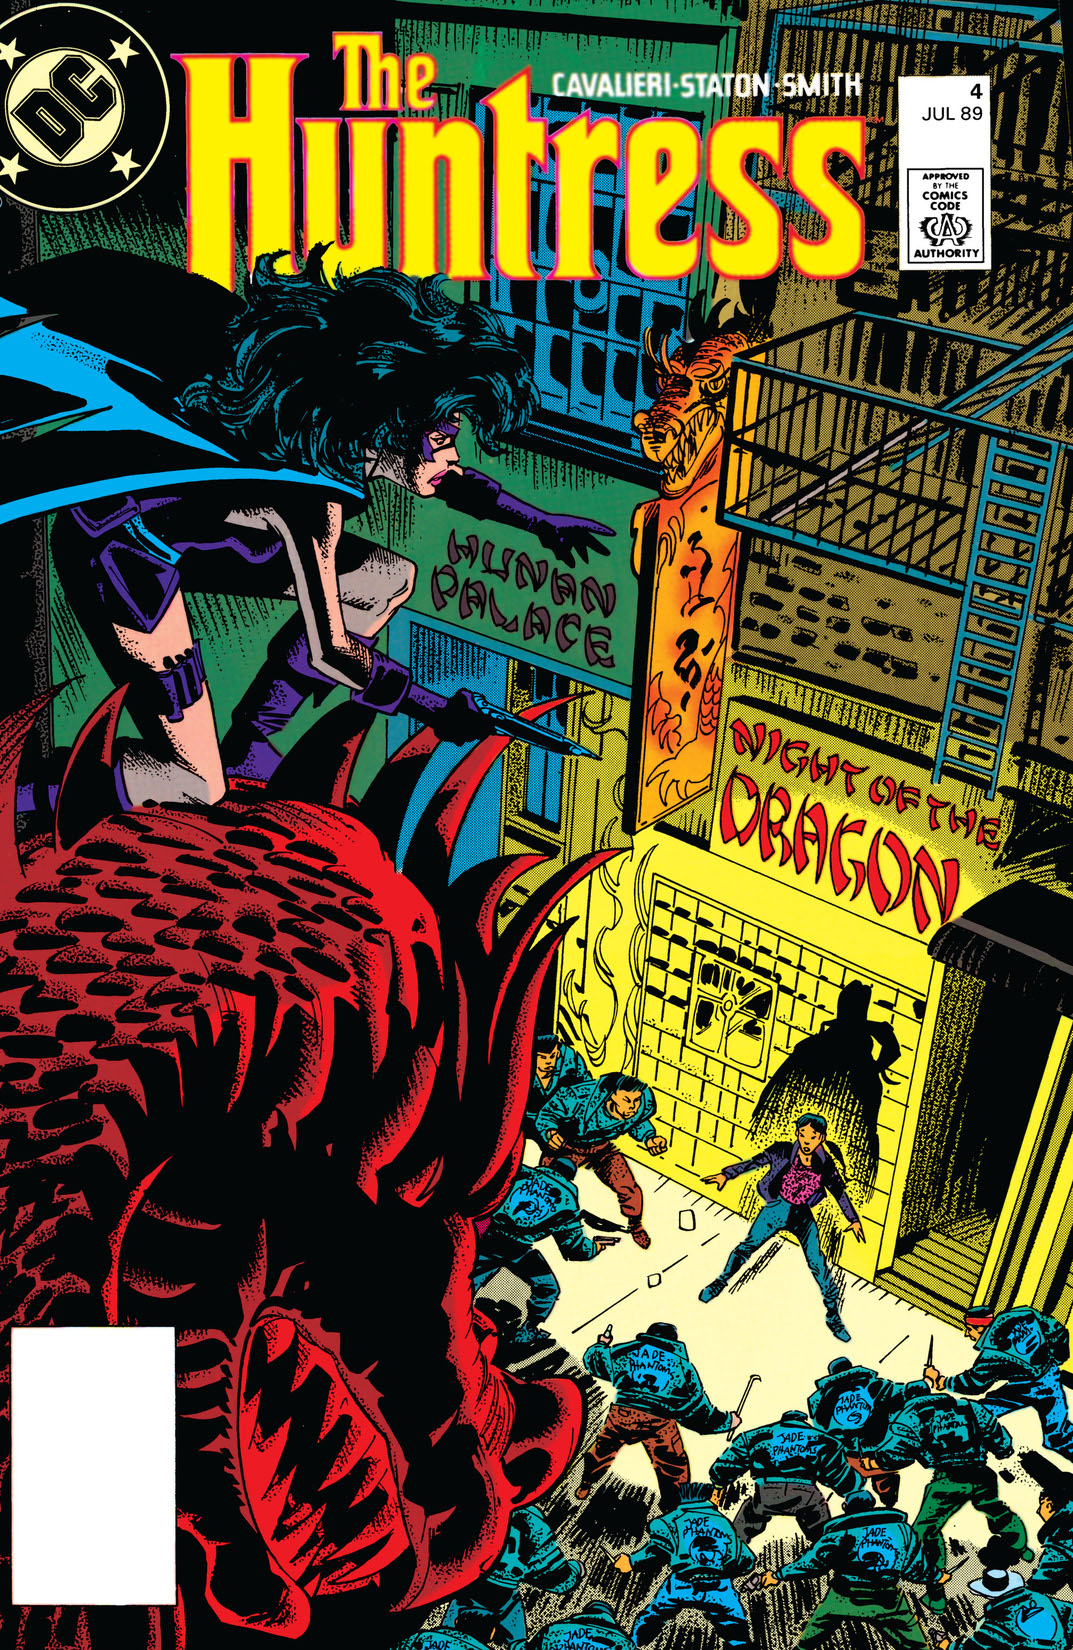 The Huntress (1989-) #4 preview images